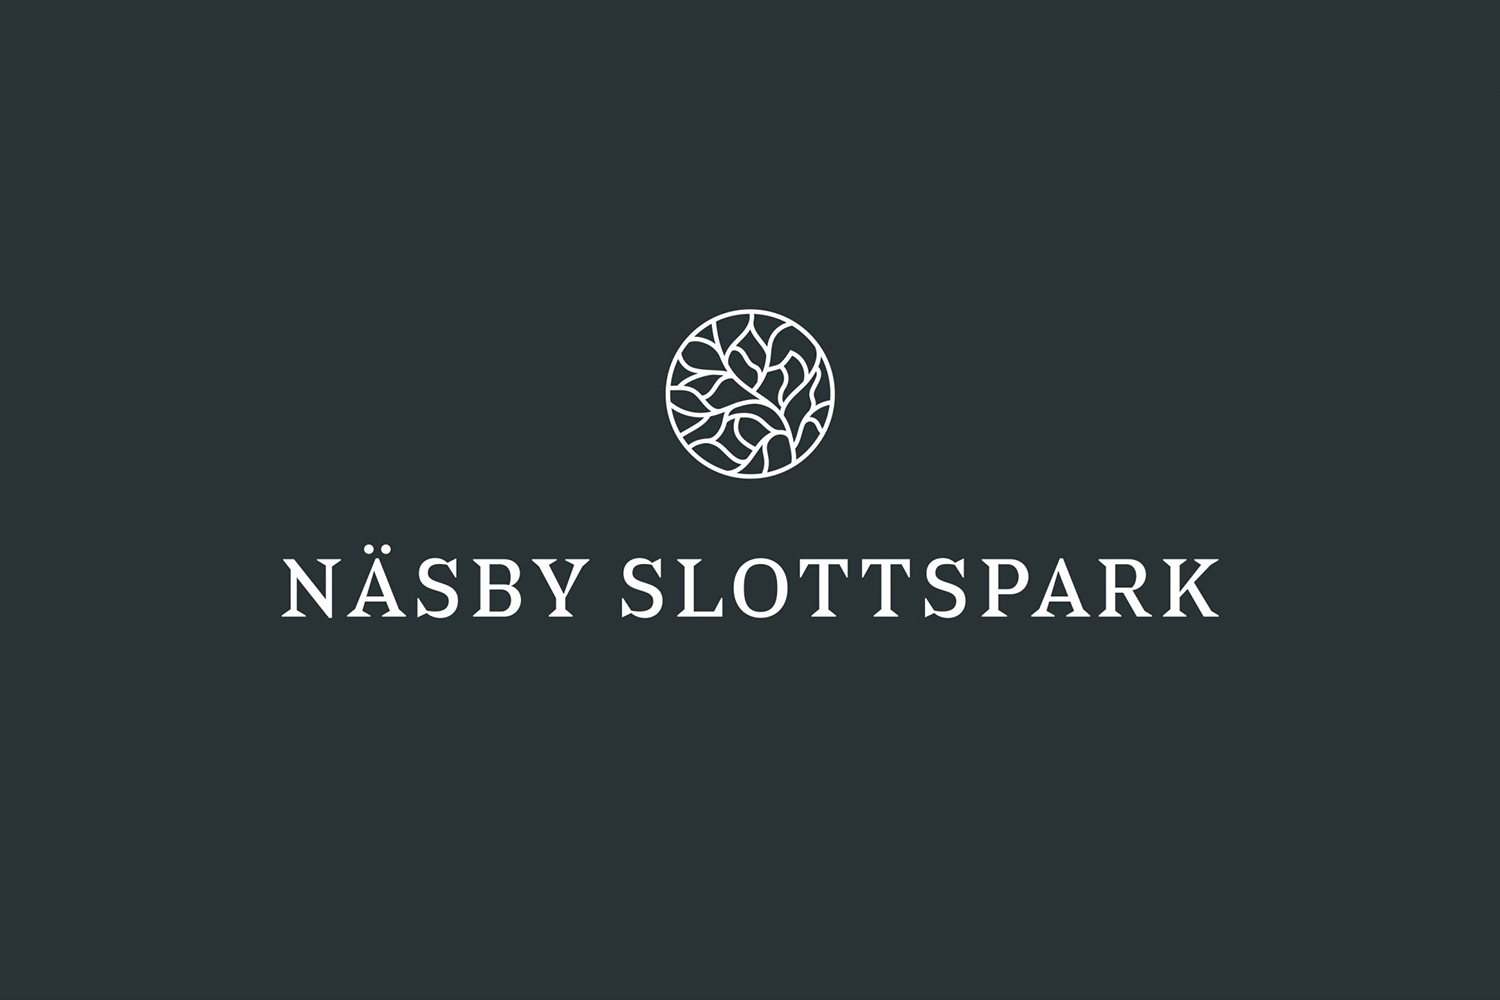 The Best of BP&O May 2018 - Näsby Slottspark by Bedow